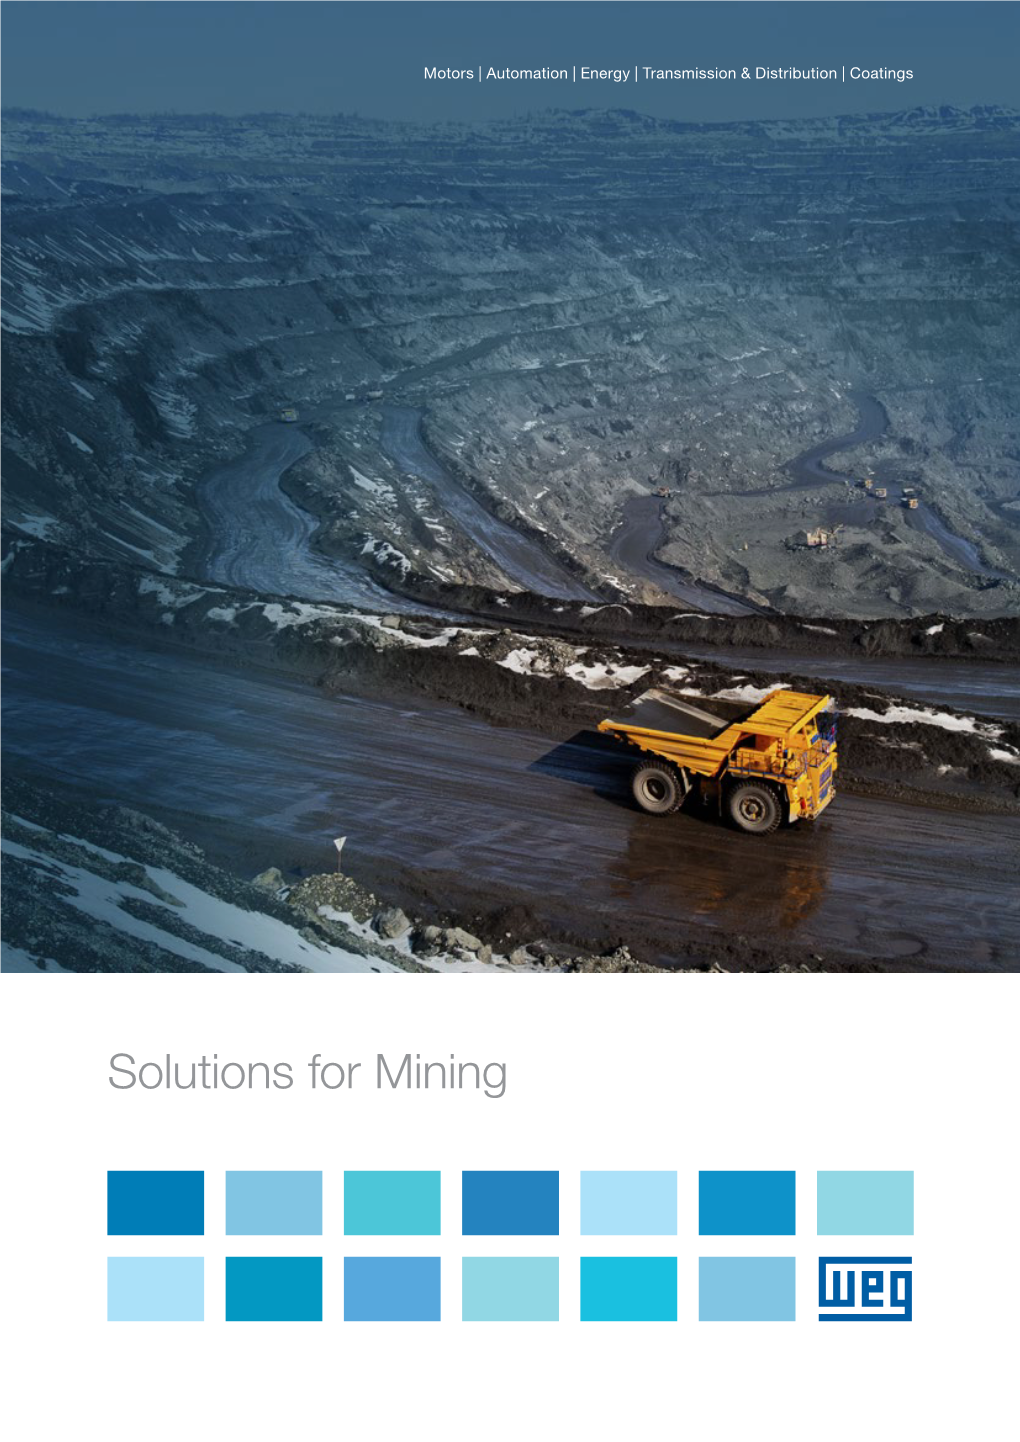 Solutions for Mining the WEG Group